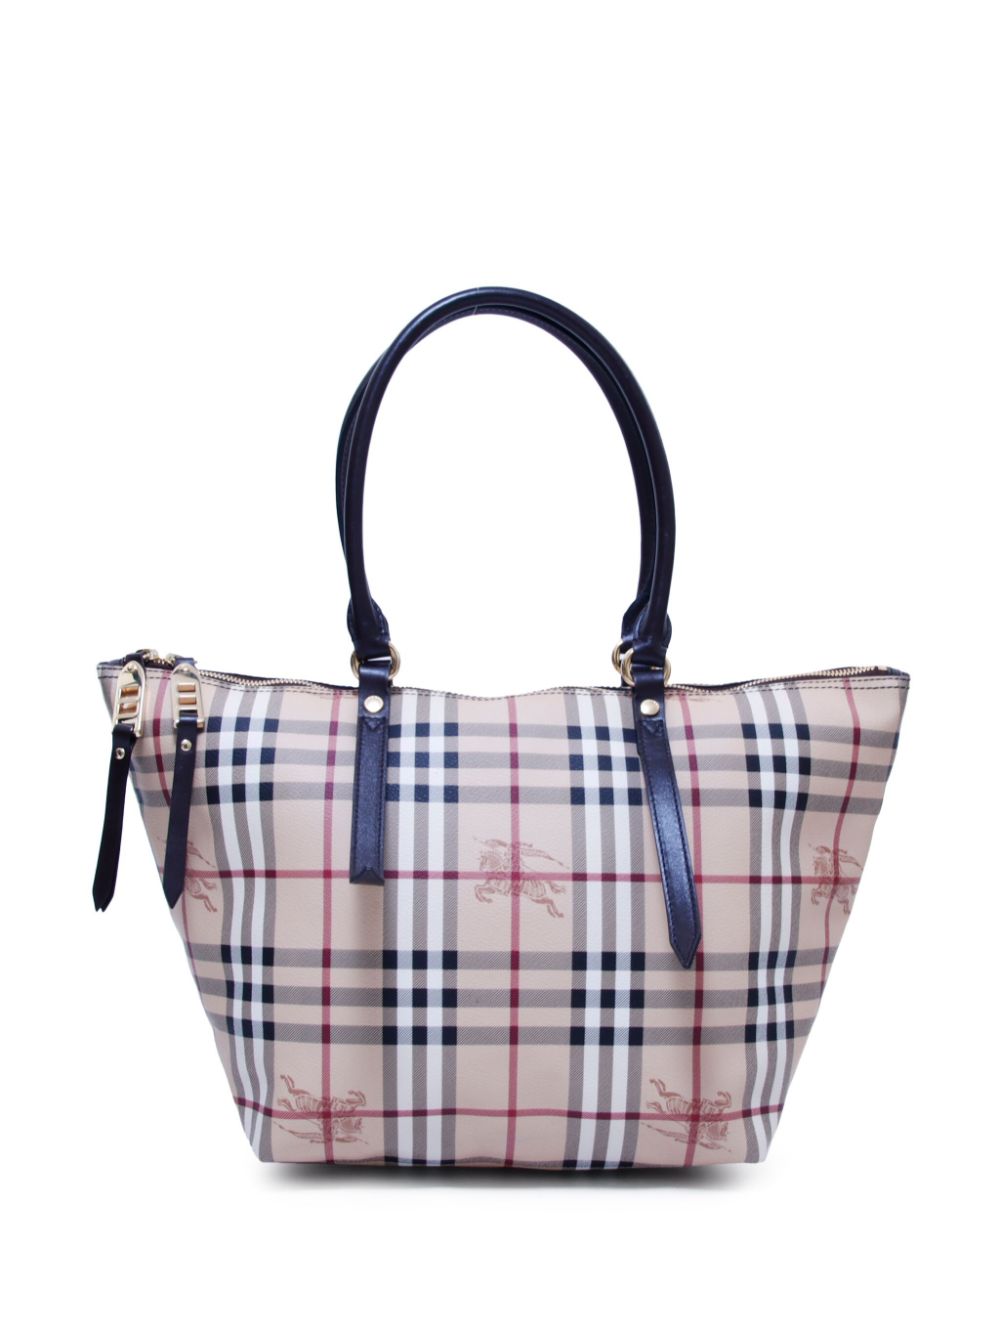 Burberry Pre-Owned Haymarket Check tote bag - Neutrals